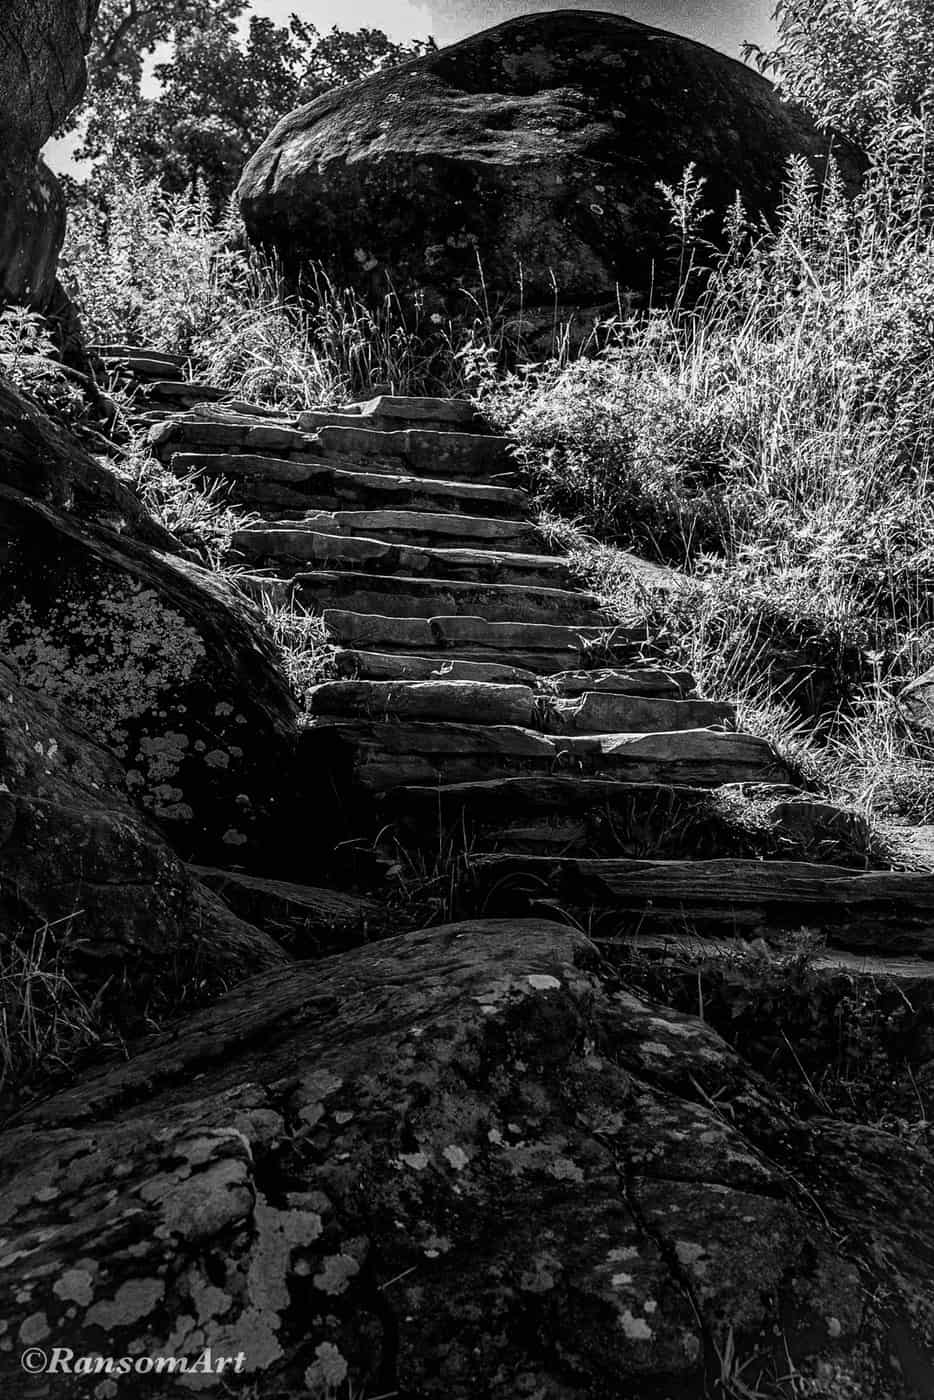 Black and white photo of stairs going up in natural environment with rocks and grass around